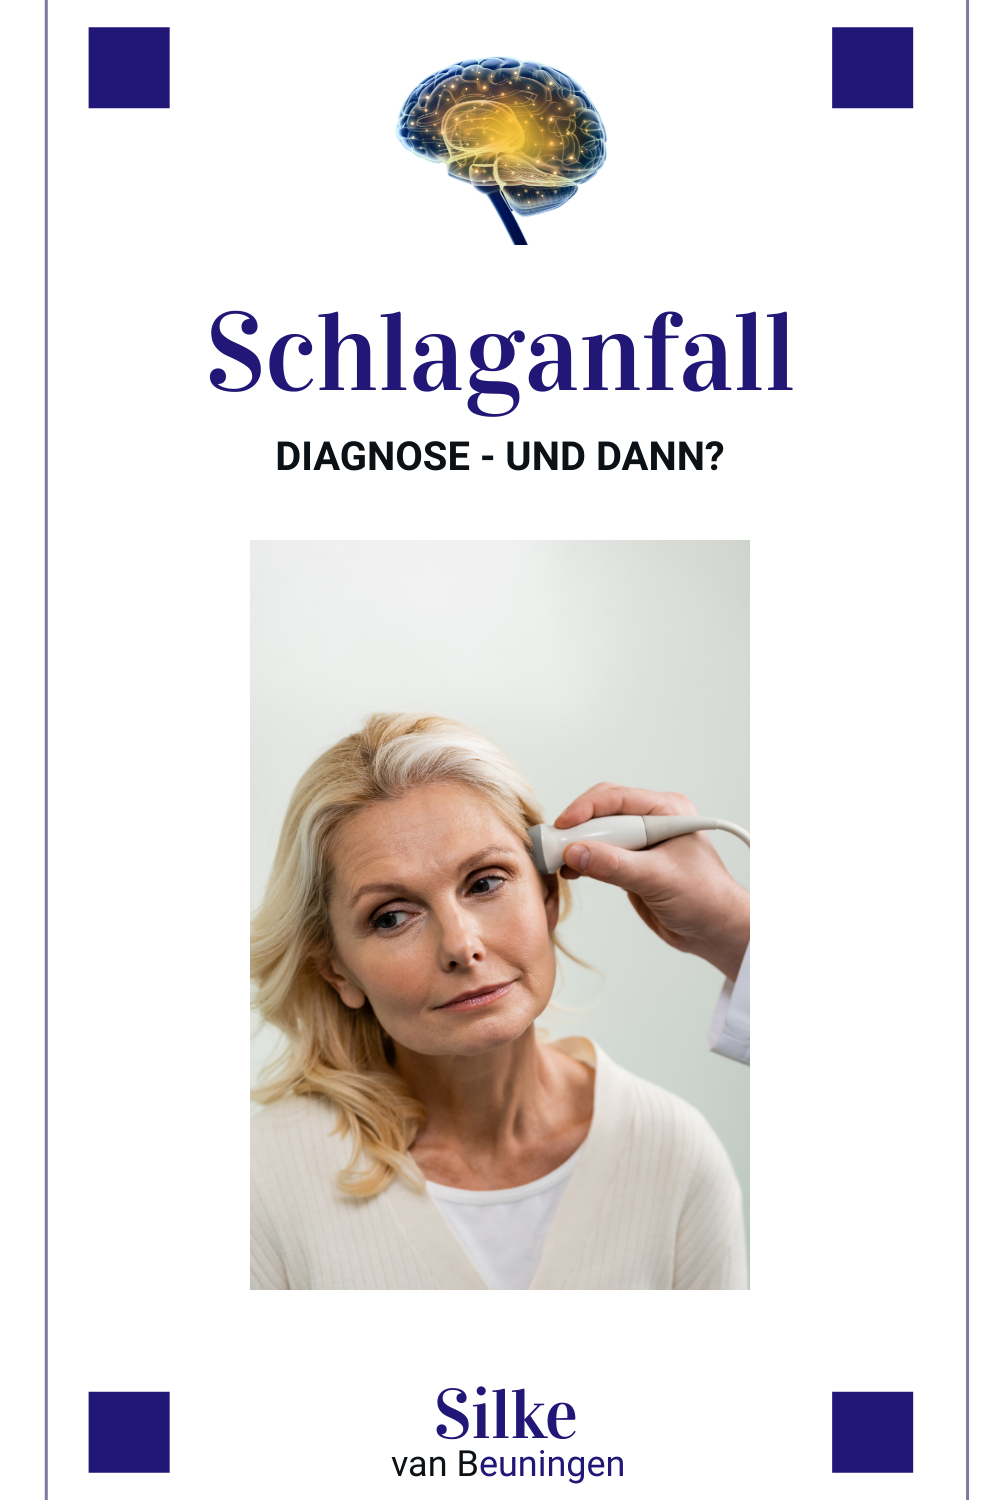 Schlaganfall Diagnose